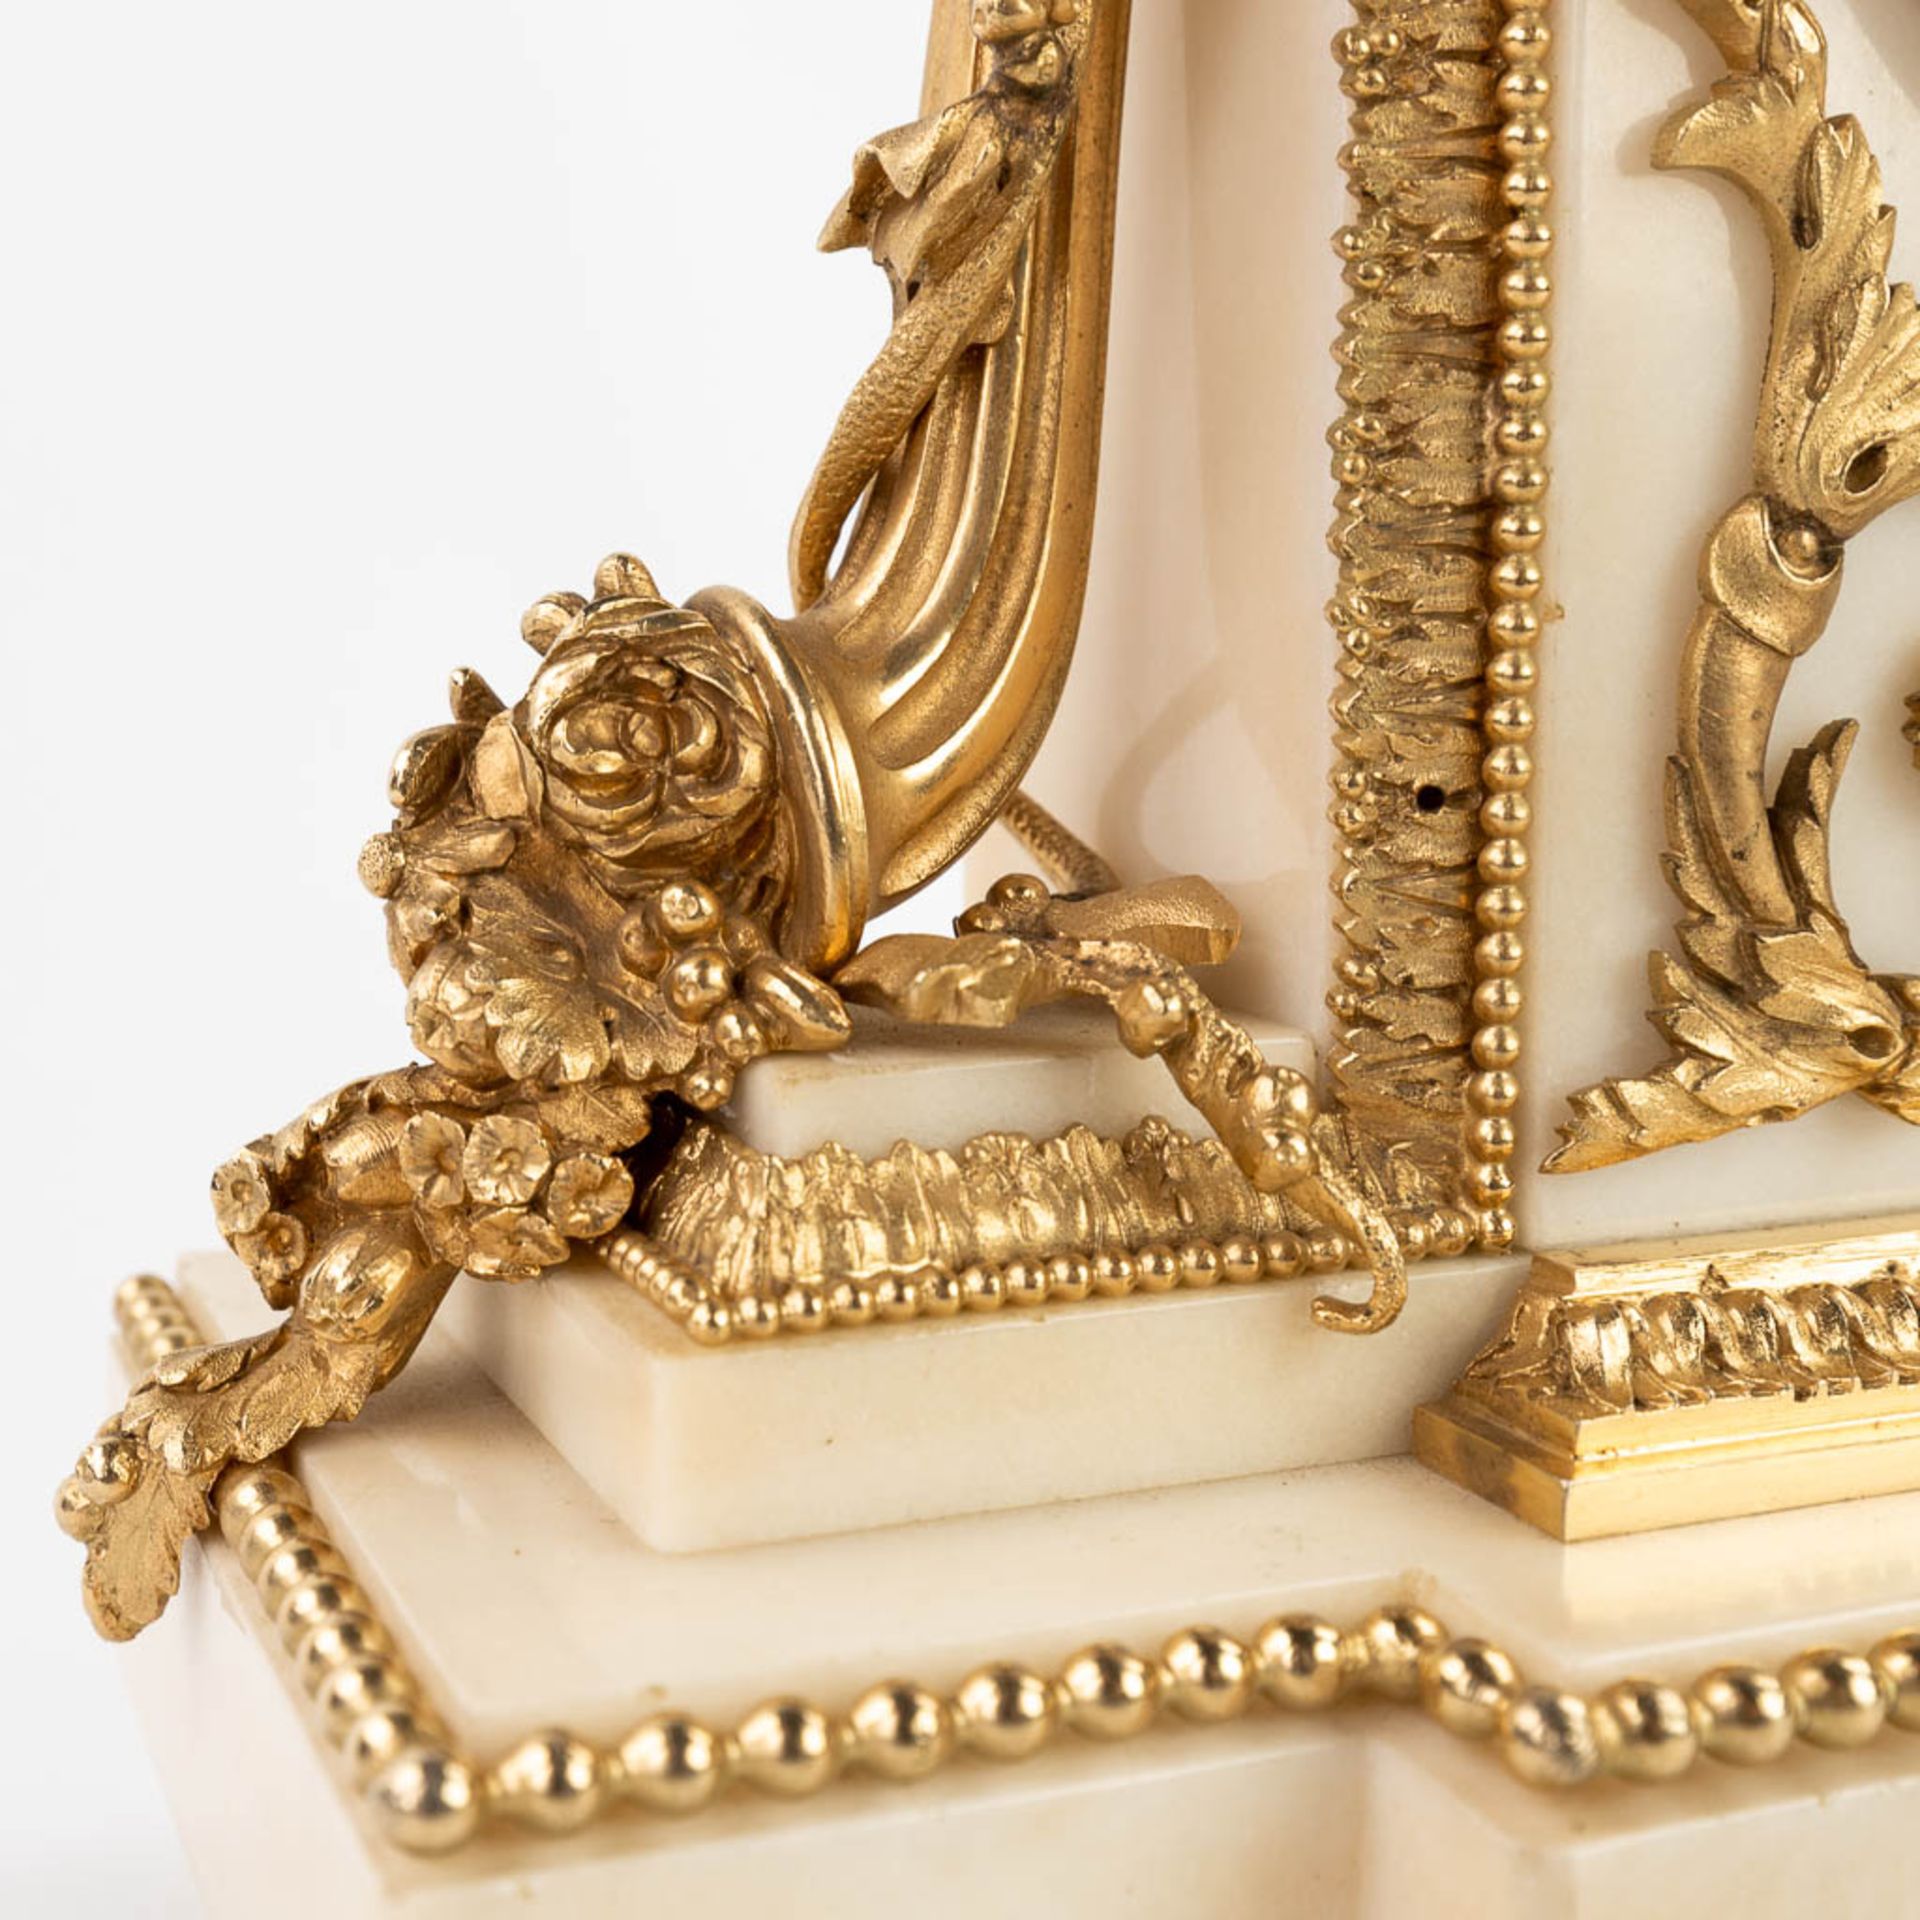 A table clock made of white marble mounted with gold-plated bronze in Louis XVI style. (12 x 32 x 33 - Image 12 of 15